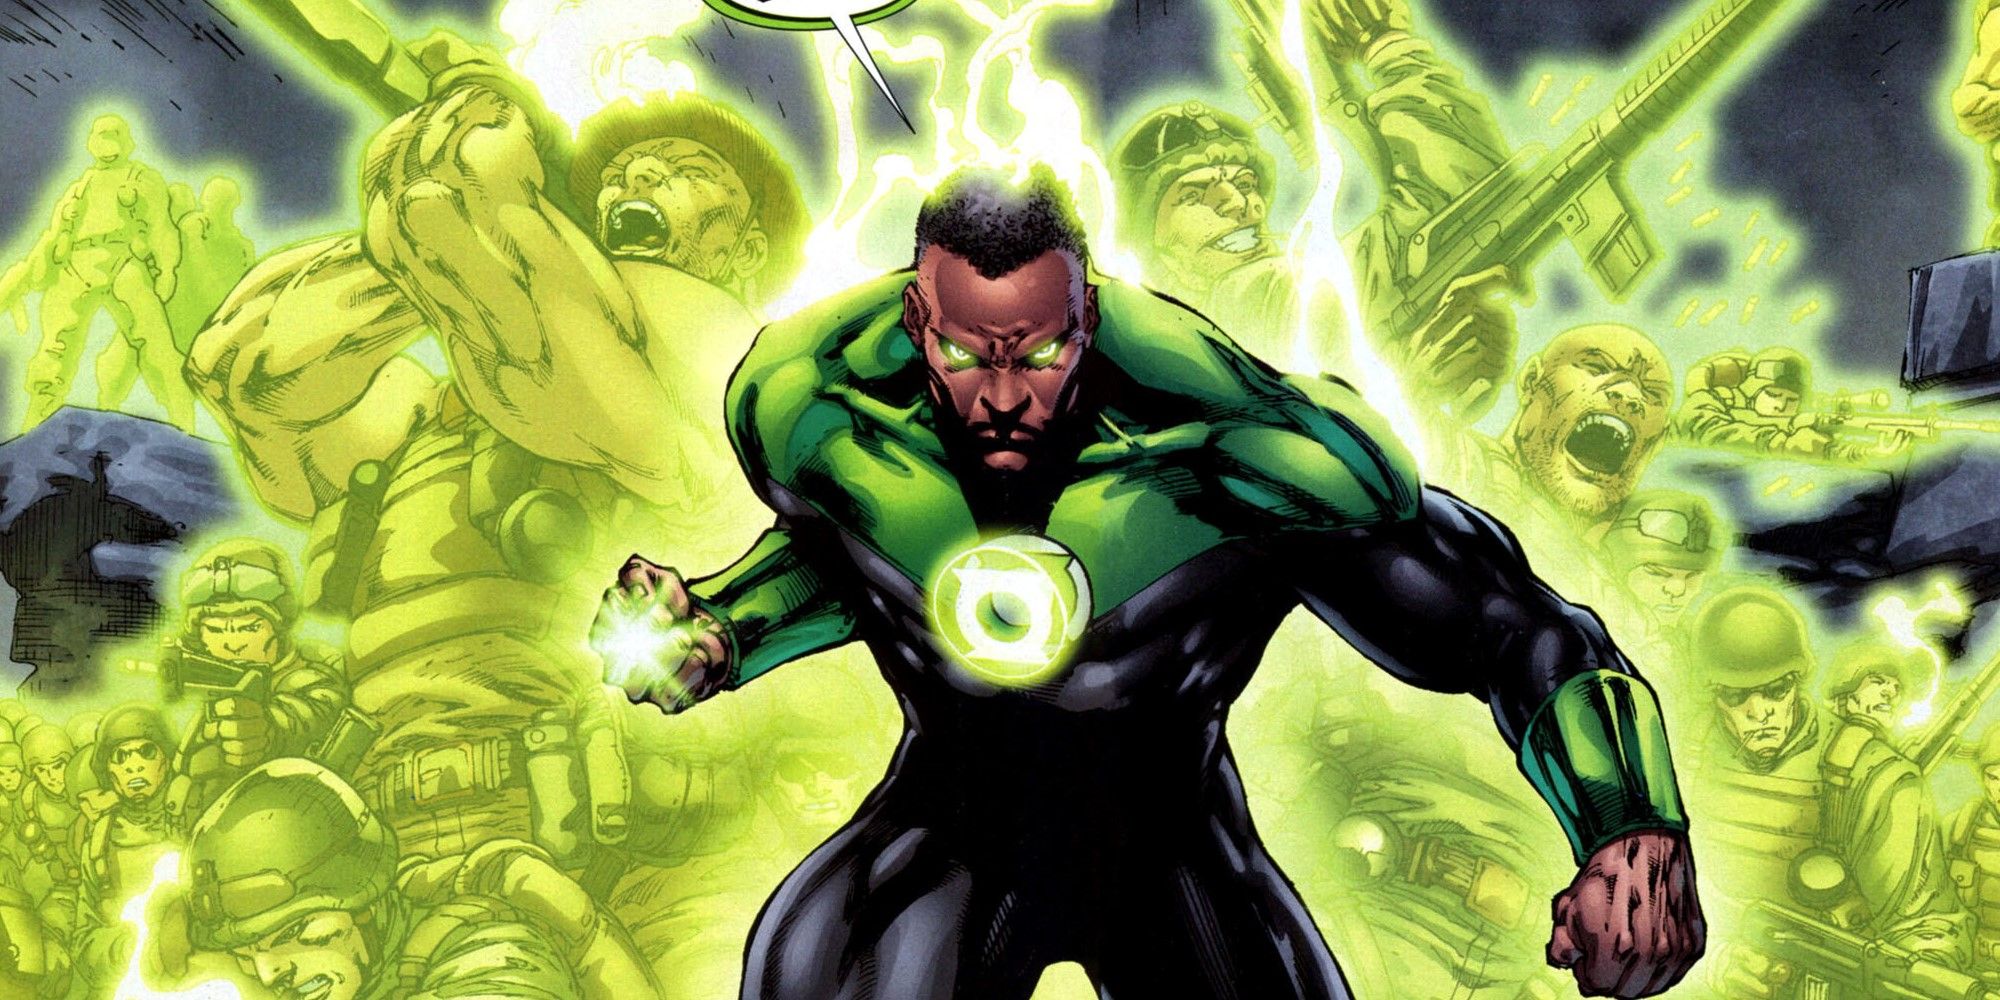 Green Lantern constructed an entire army to defeat his enemies